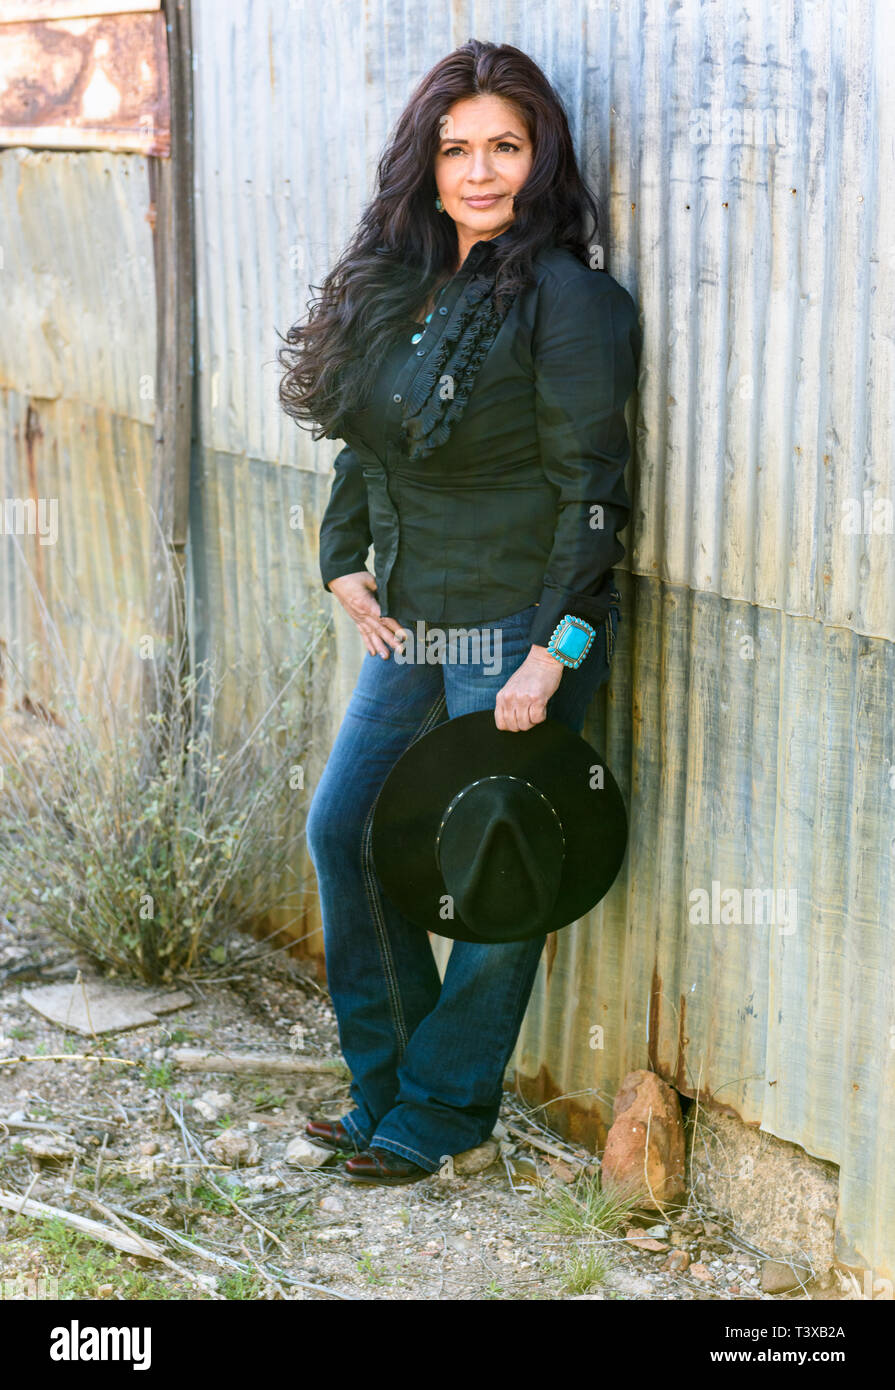 Attractive woman with long, dark hair holds cowboy hat in rustic, rural setting. Stock Photo